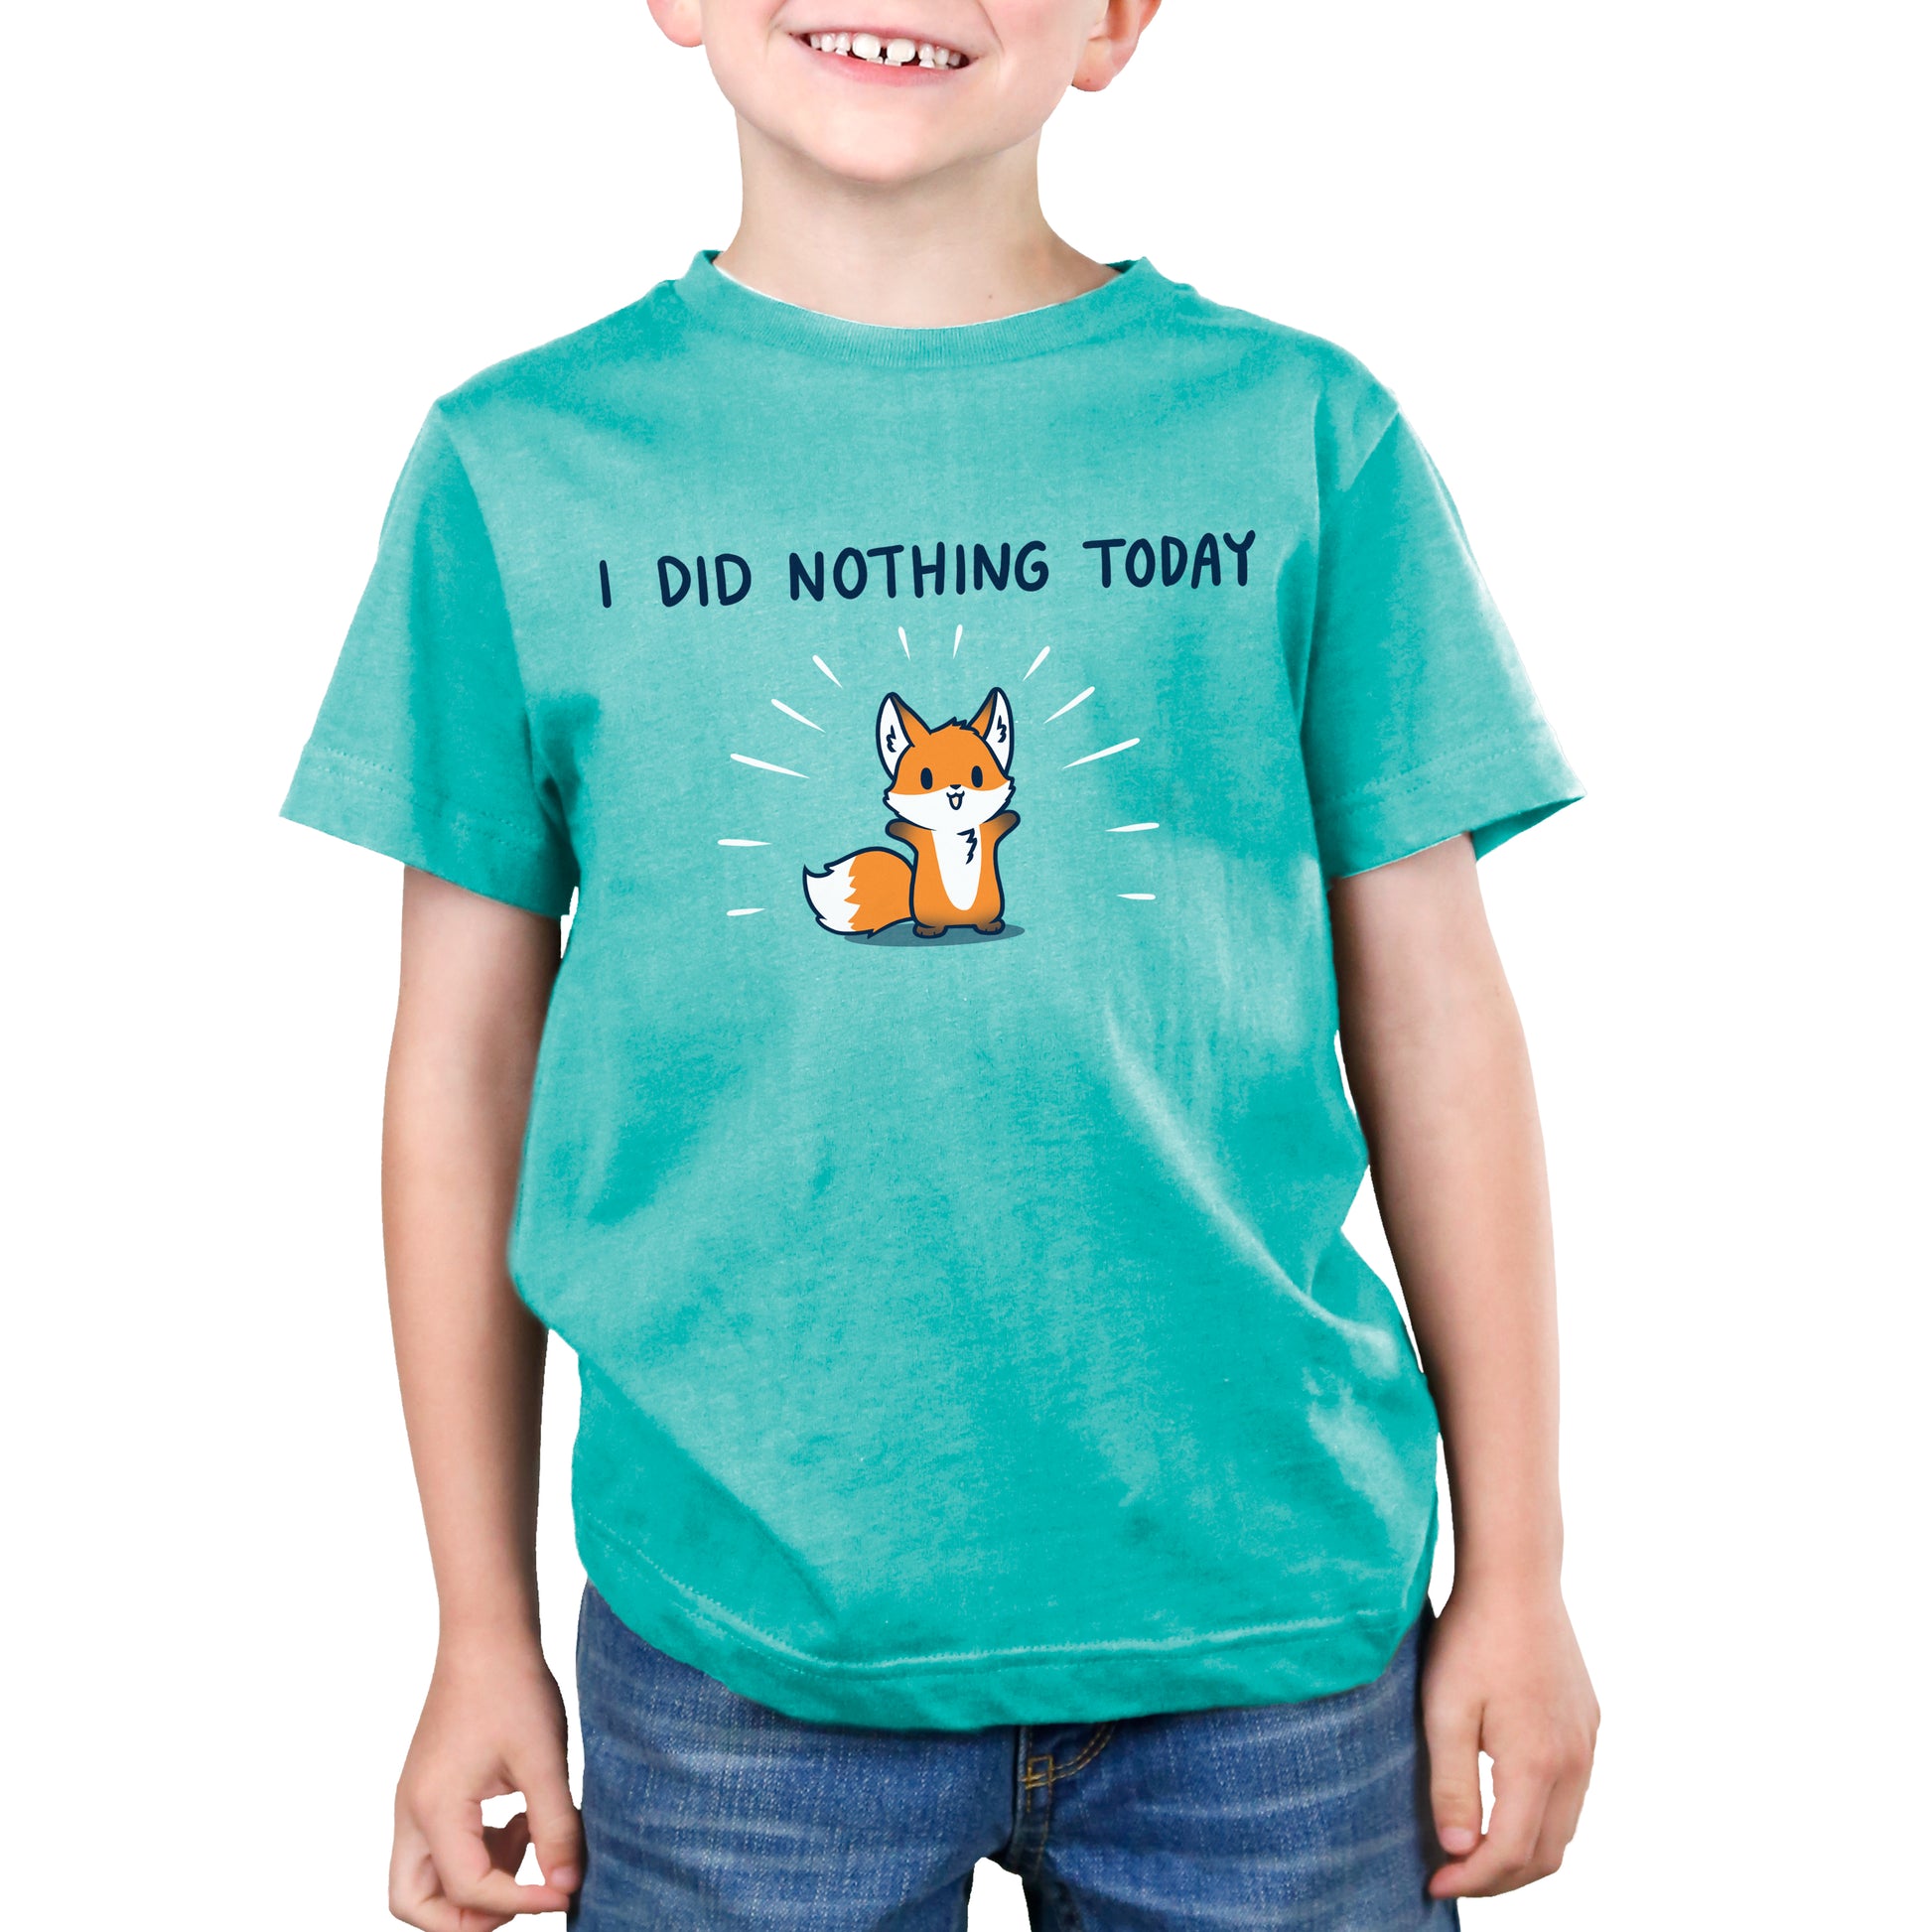 A young boy wearing a TeeTurtle original t-shirt in Caribbean Blue that says "I Did Nothing Today" by TeeTurtle.